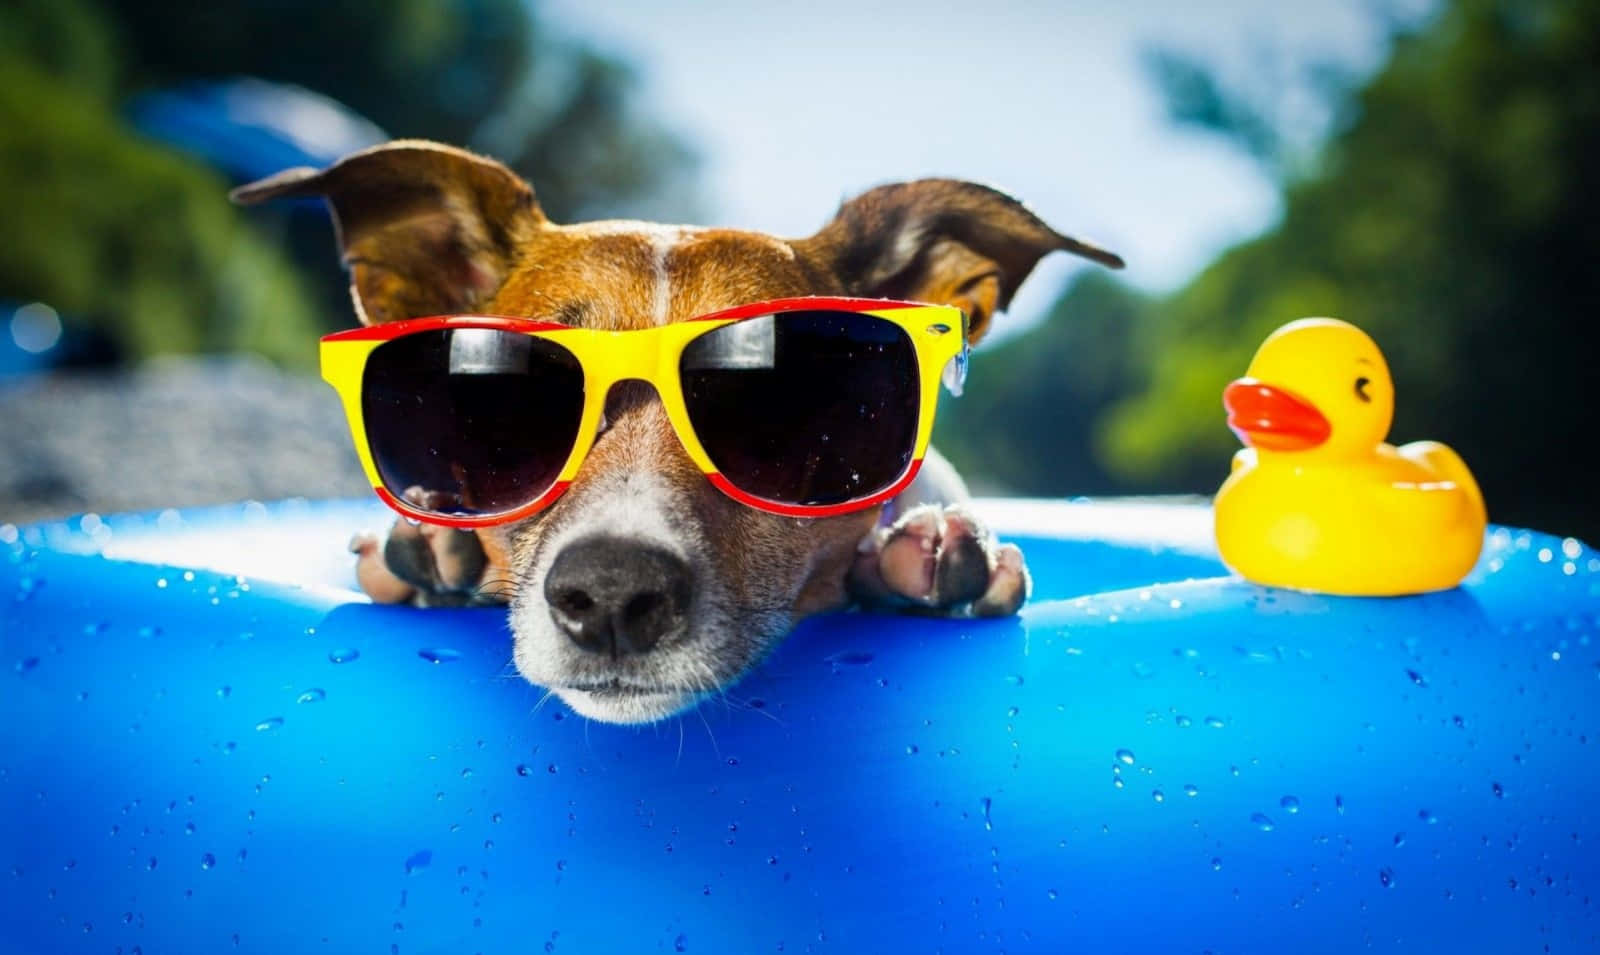 Cool Dog With Sunglasses And Rubber Duckie